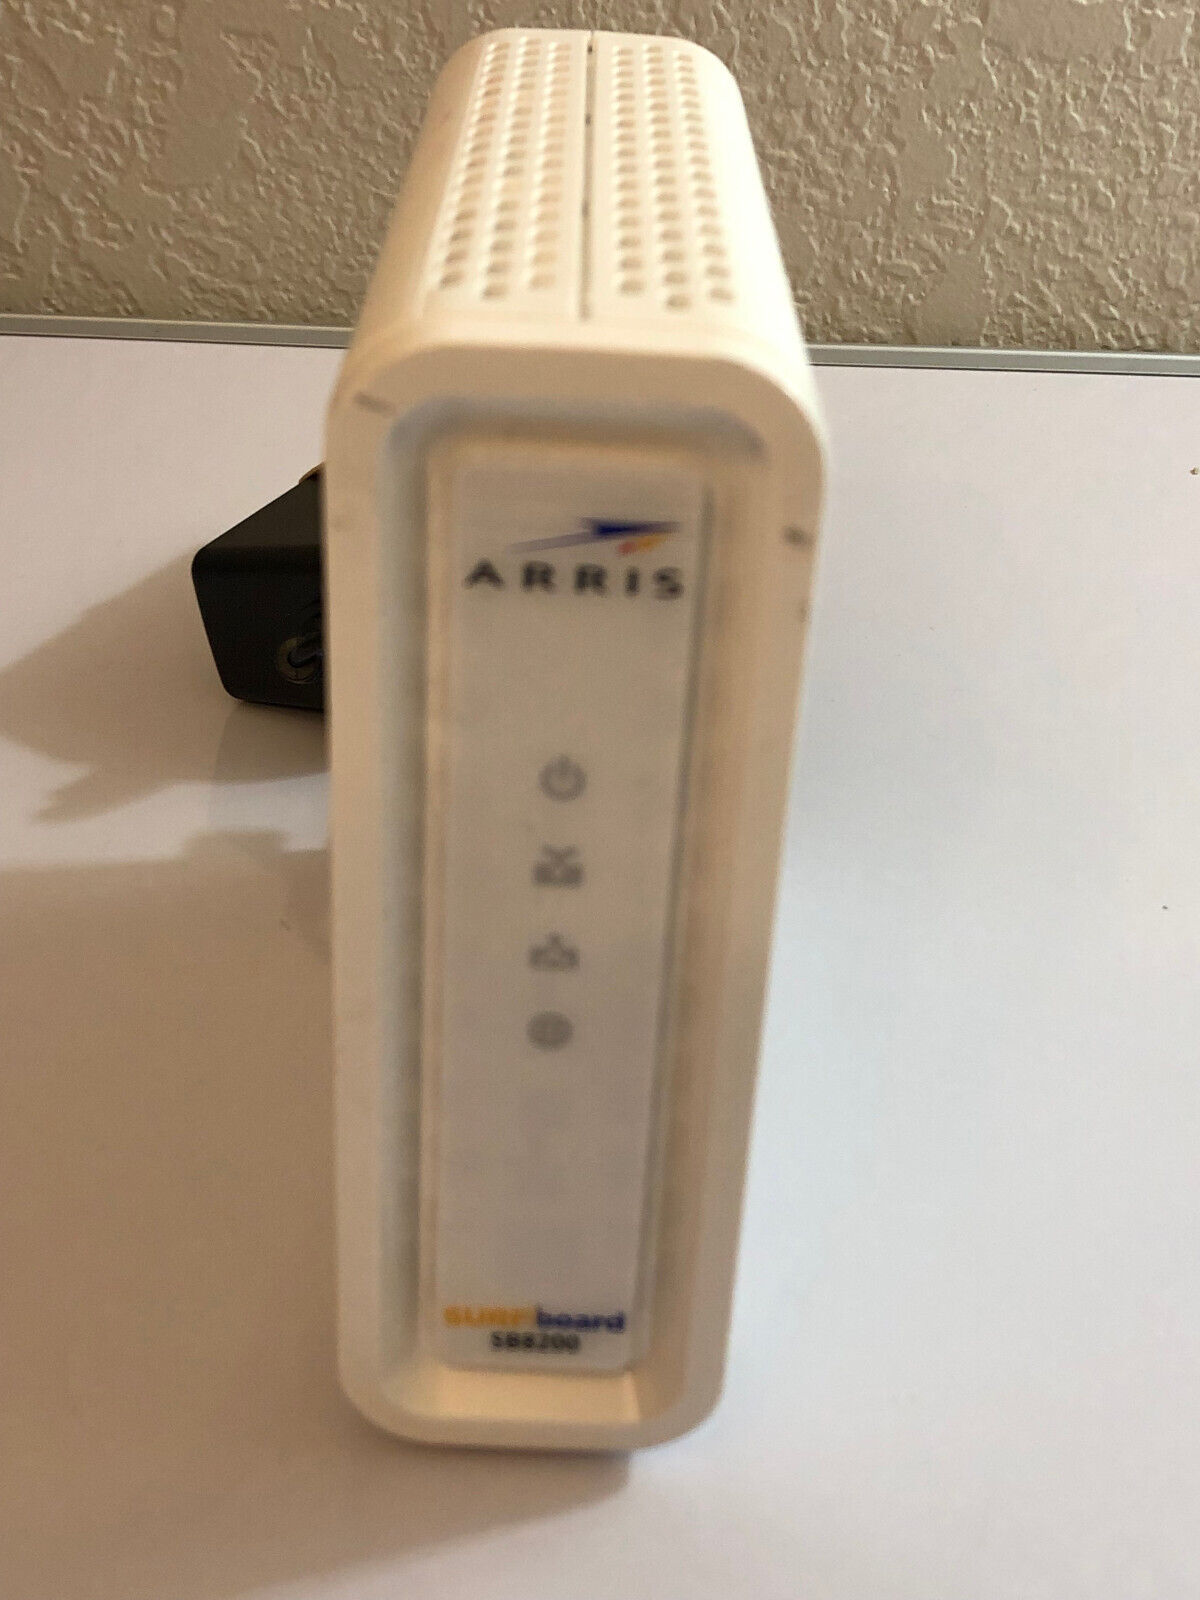 ARRIS SURFboard SB8200 DOCSIS 3.1 10 Gbps Cable Modem NOT FOR COX